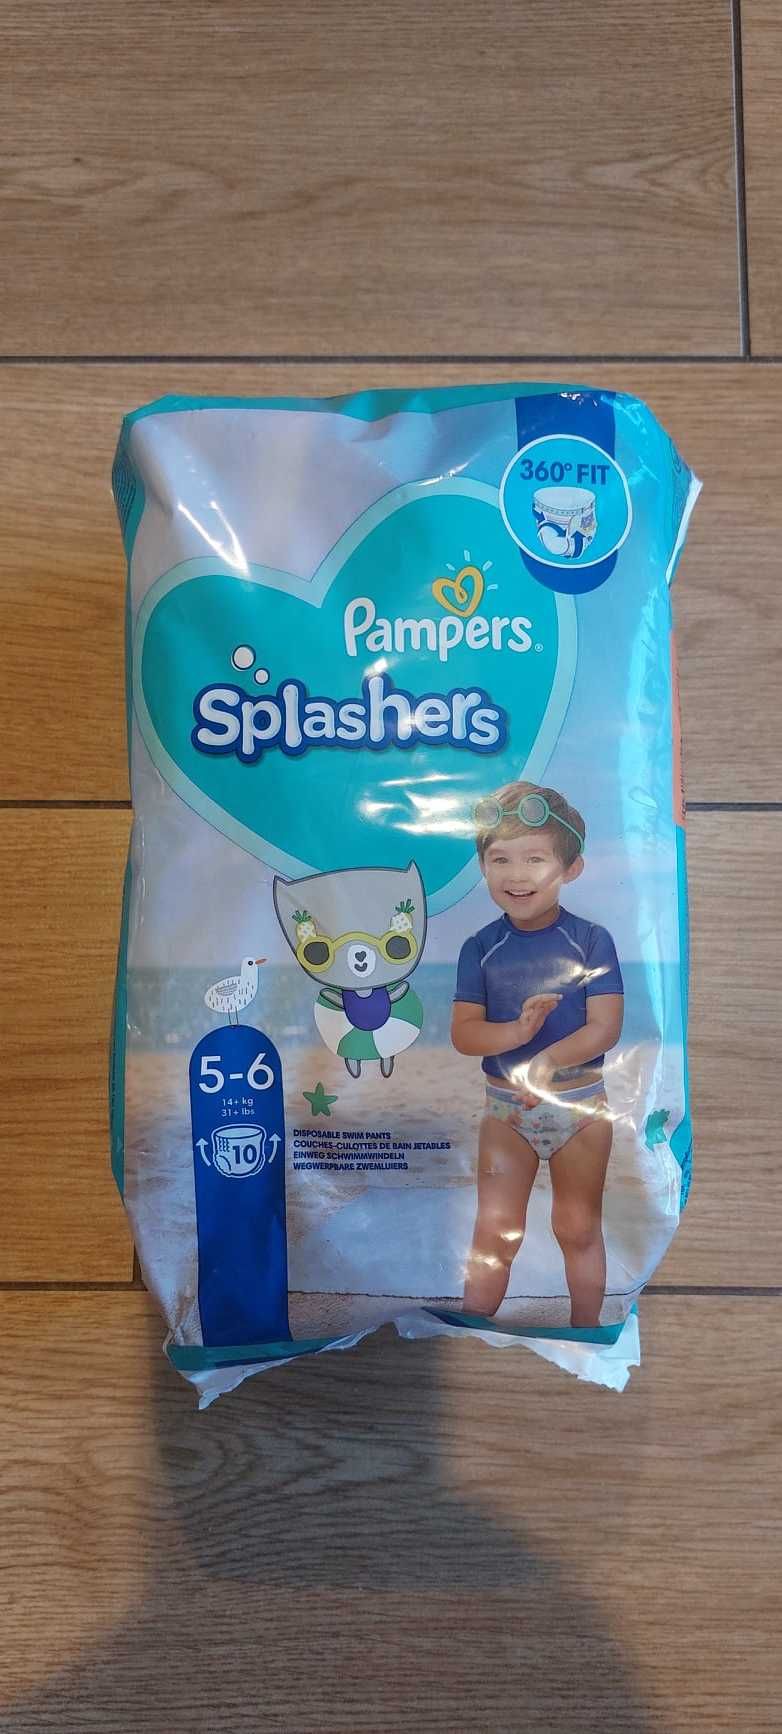 Pampers Spalshers 5-6 10szt